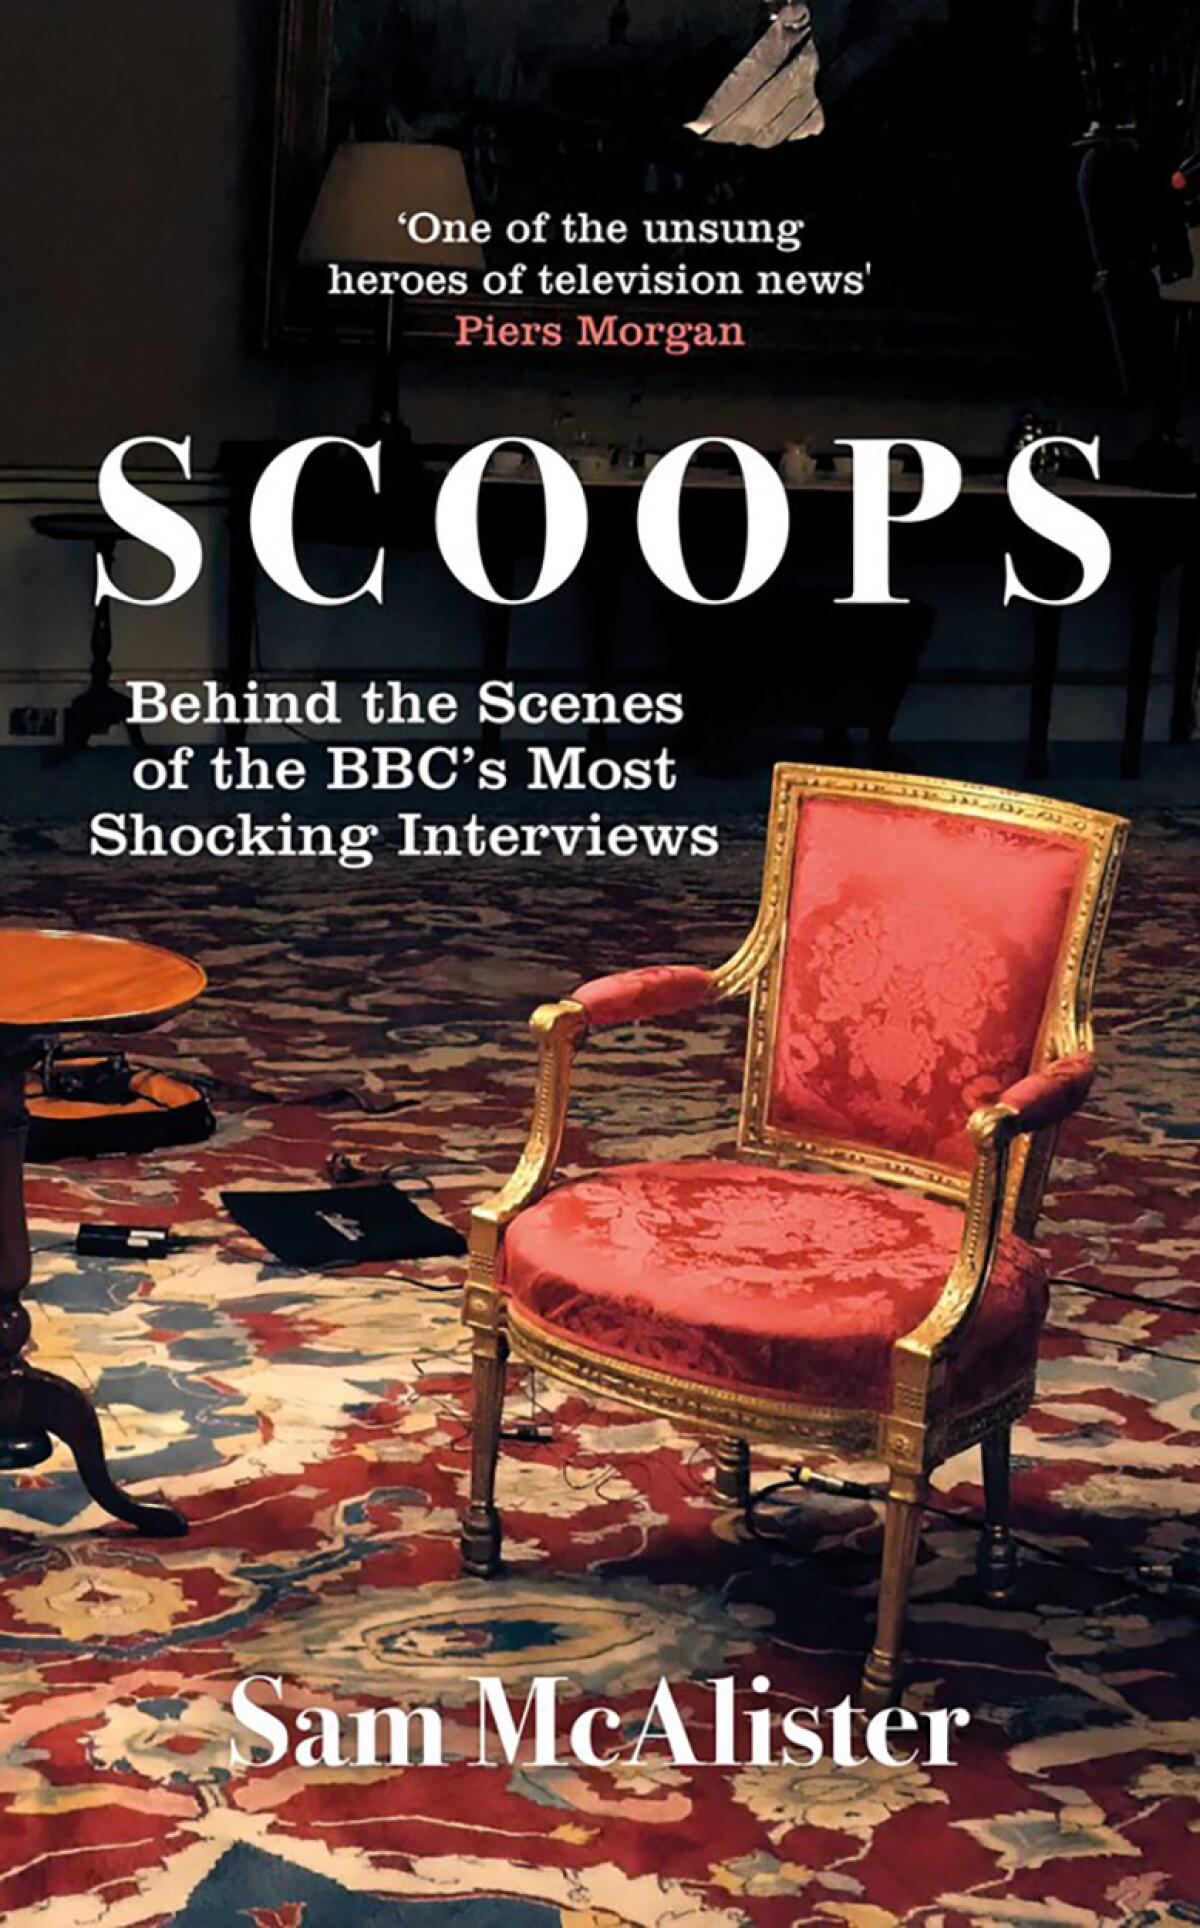 "Scoops: Behind the Scenes of the BBC's Most Shocking Interviews." by Sam McAllister